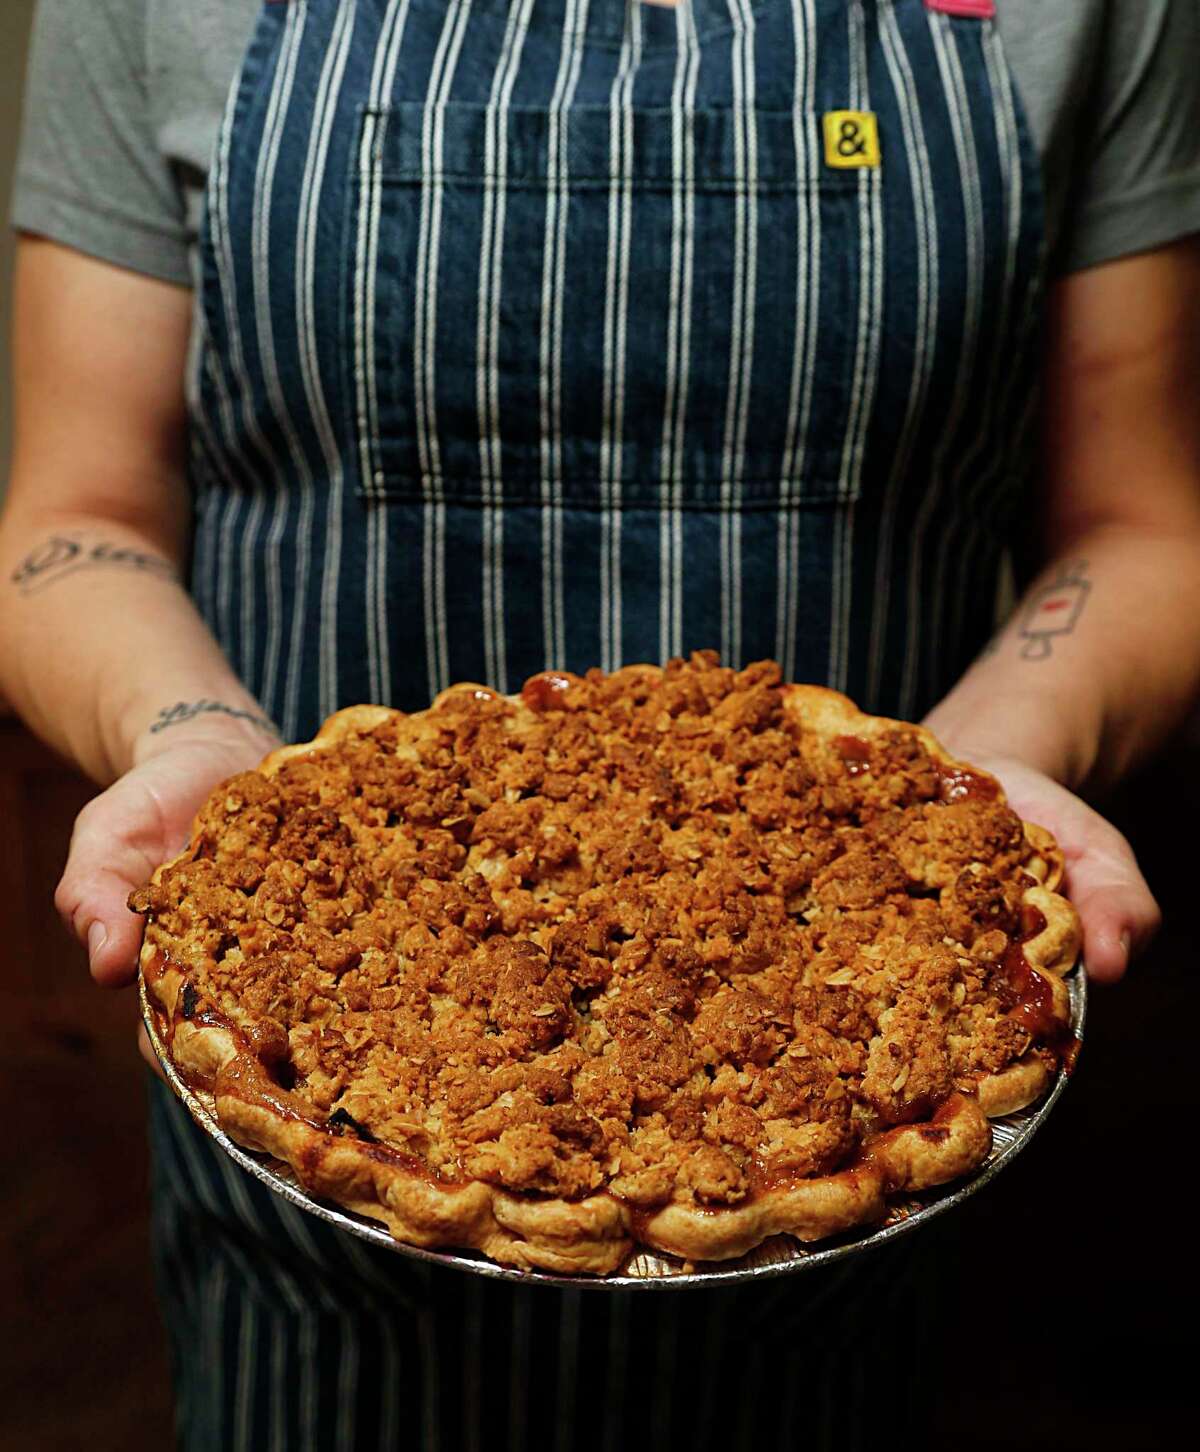 The apple pie recipe from pastry chef Rebecca Masson (owner of Fluff Bake Bar in the Heights) calls for a buttery crumble on top.